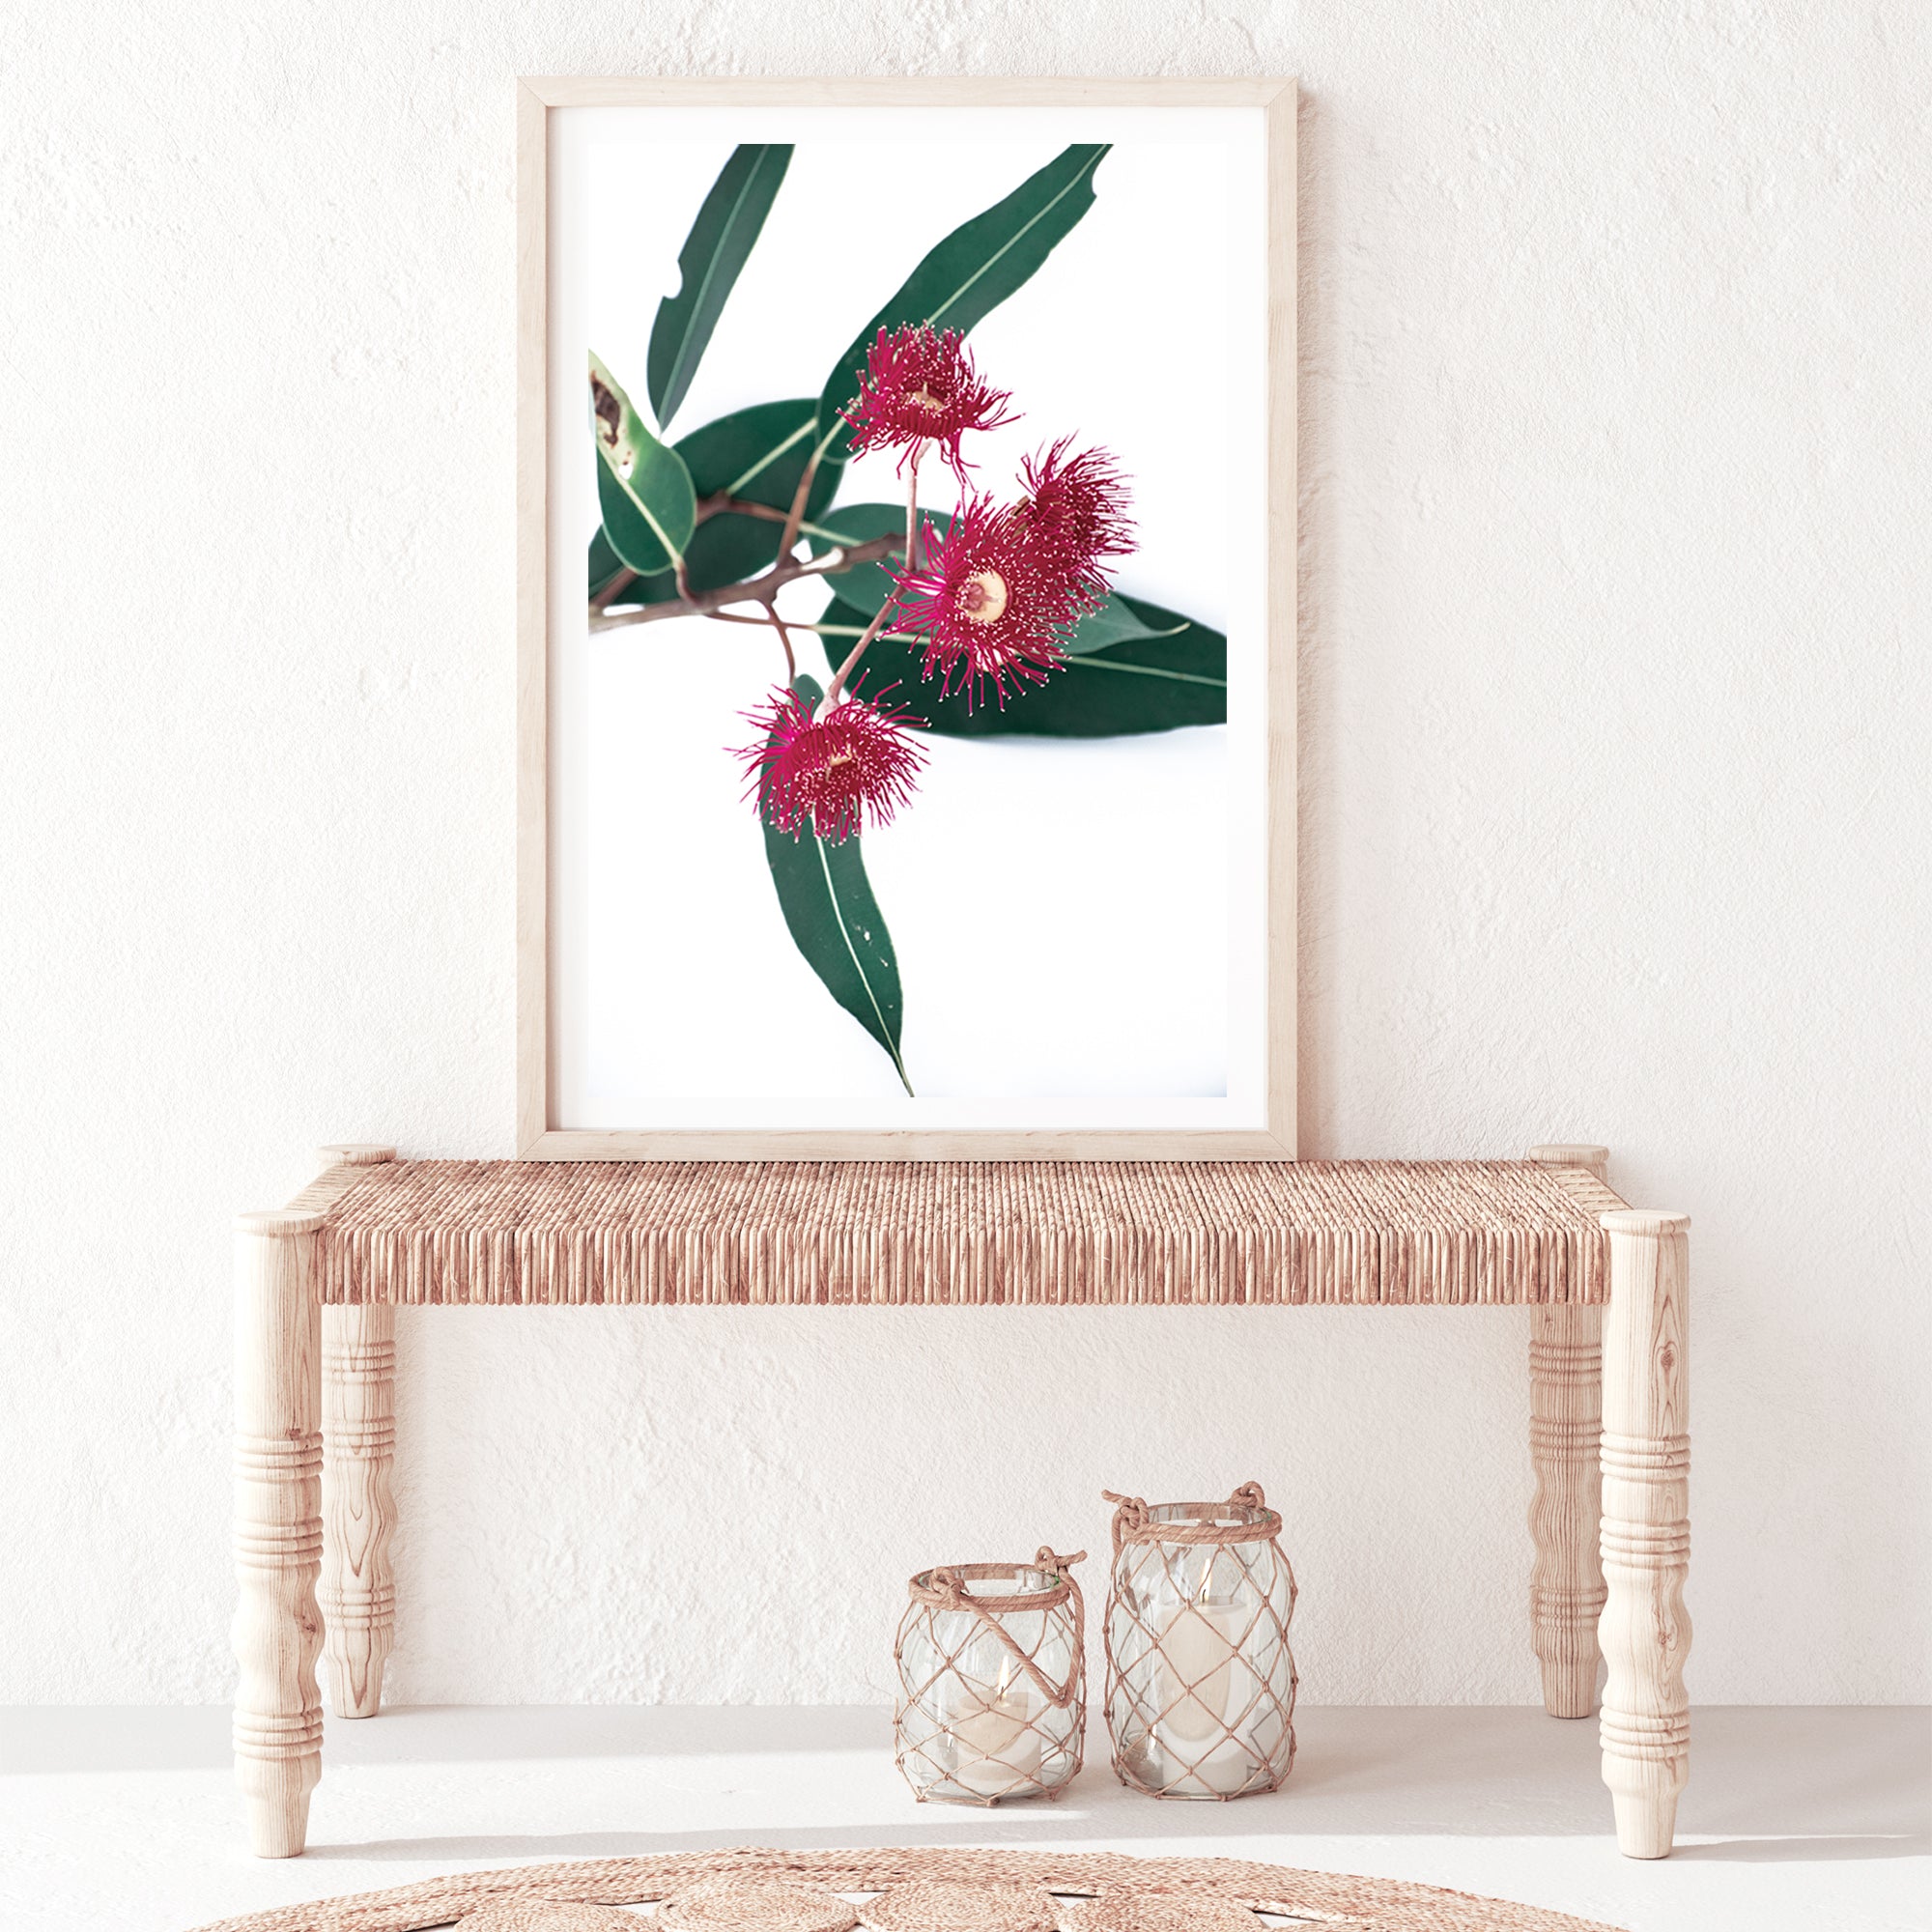 A stretched canvas floral wall art print featuring green eucalyptus leaves with beautiful red wild flowers, available framed or unframed.